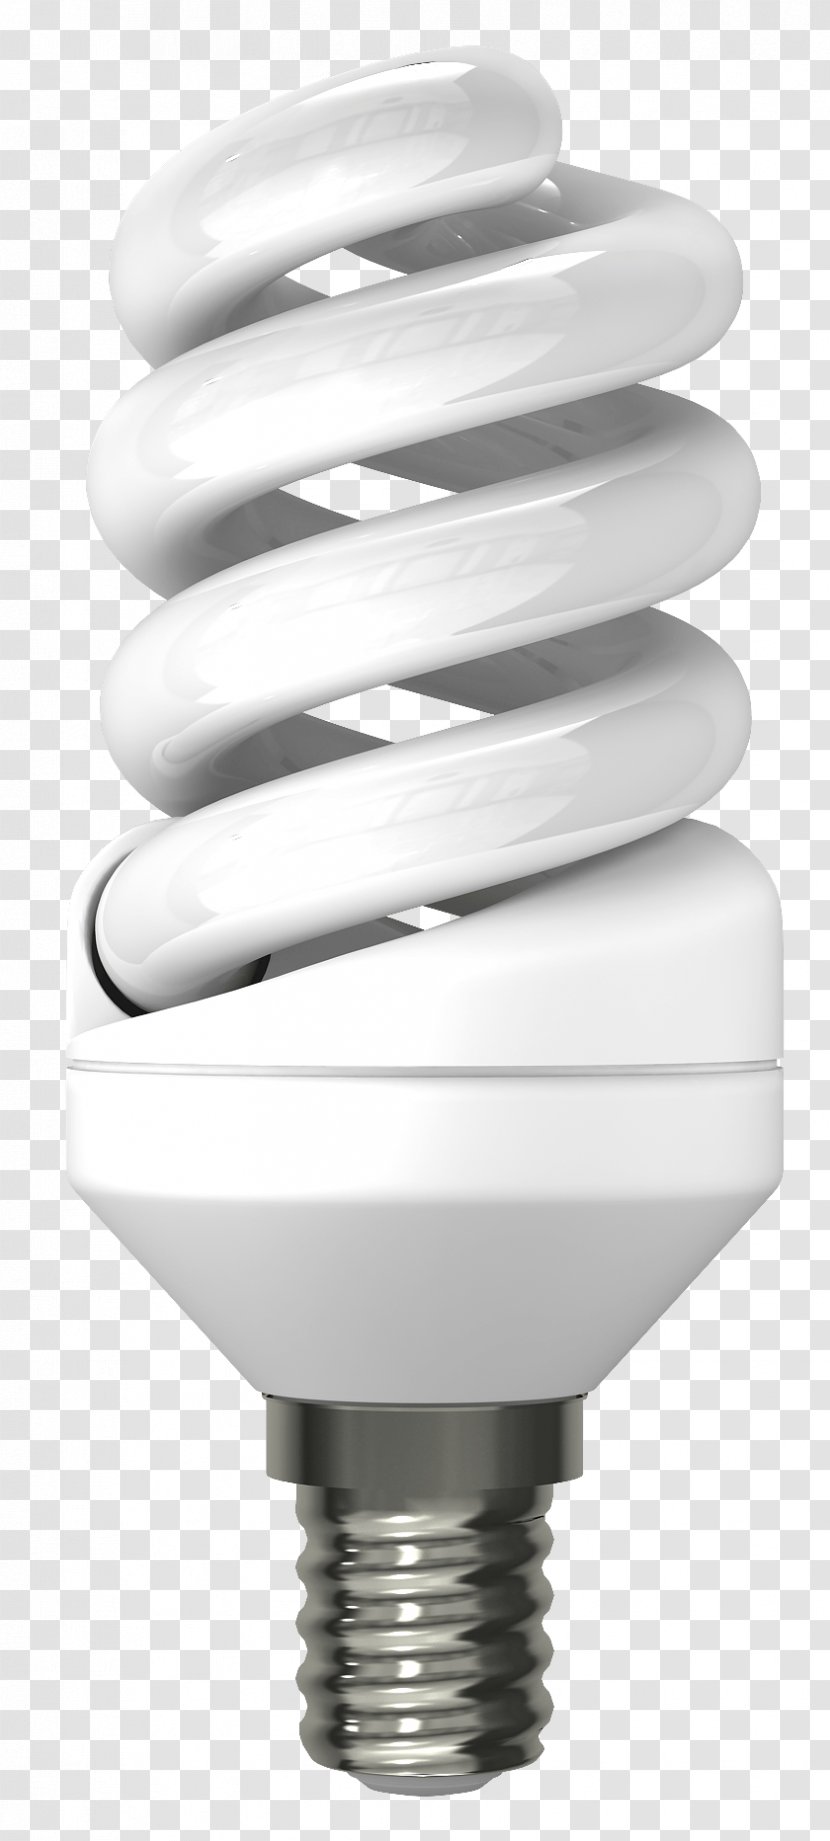 Incandescent Light Bulb Icon - Lamp Daylight Image Transparent PNG